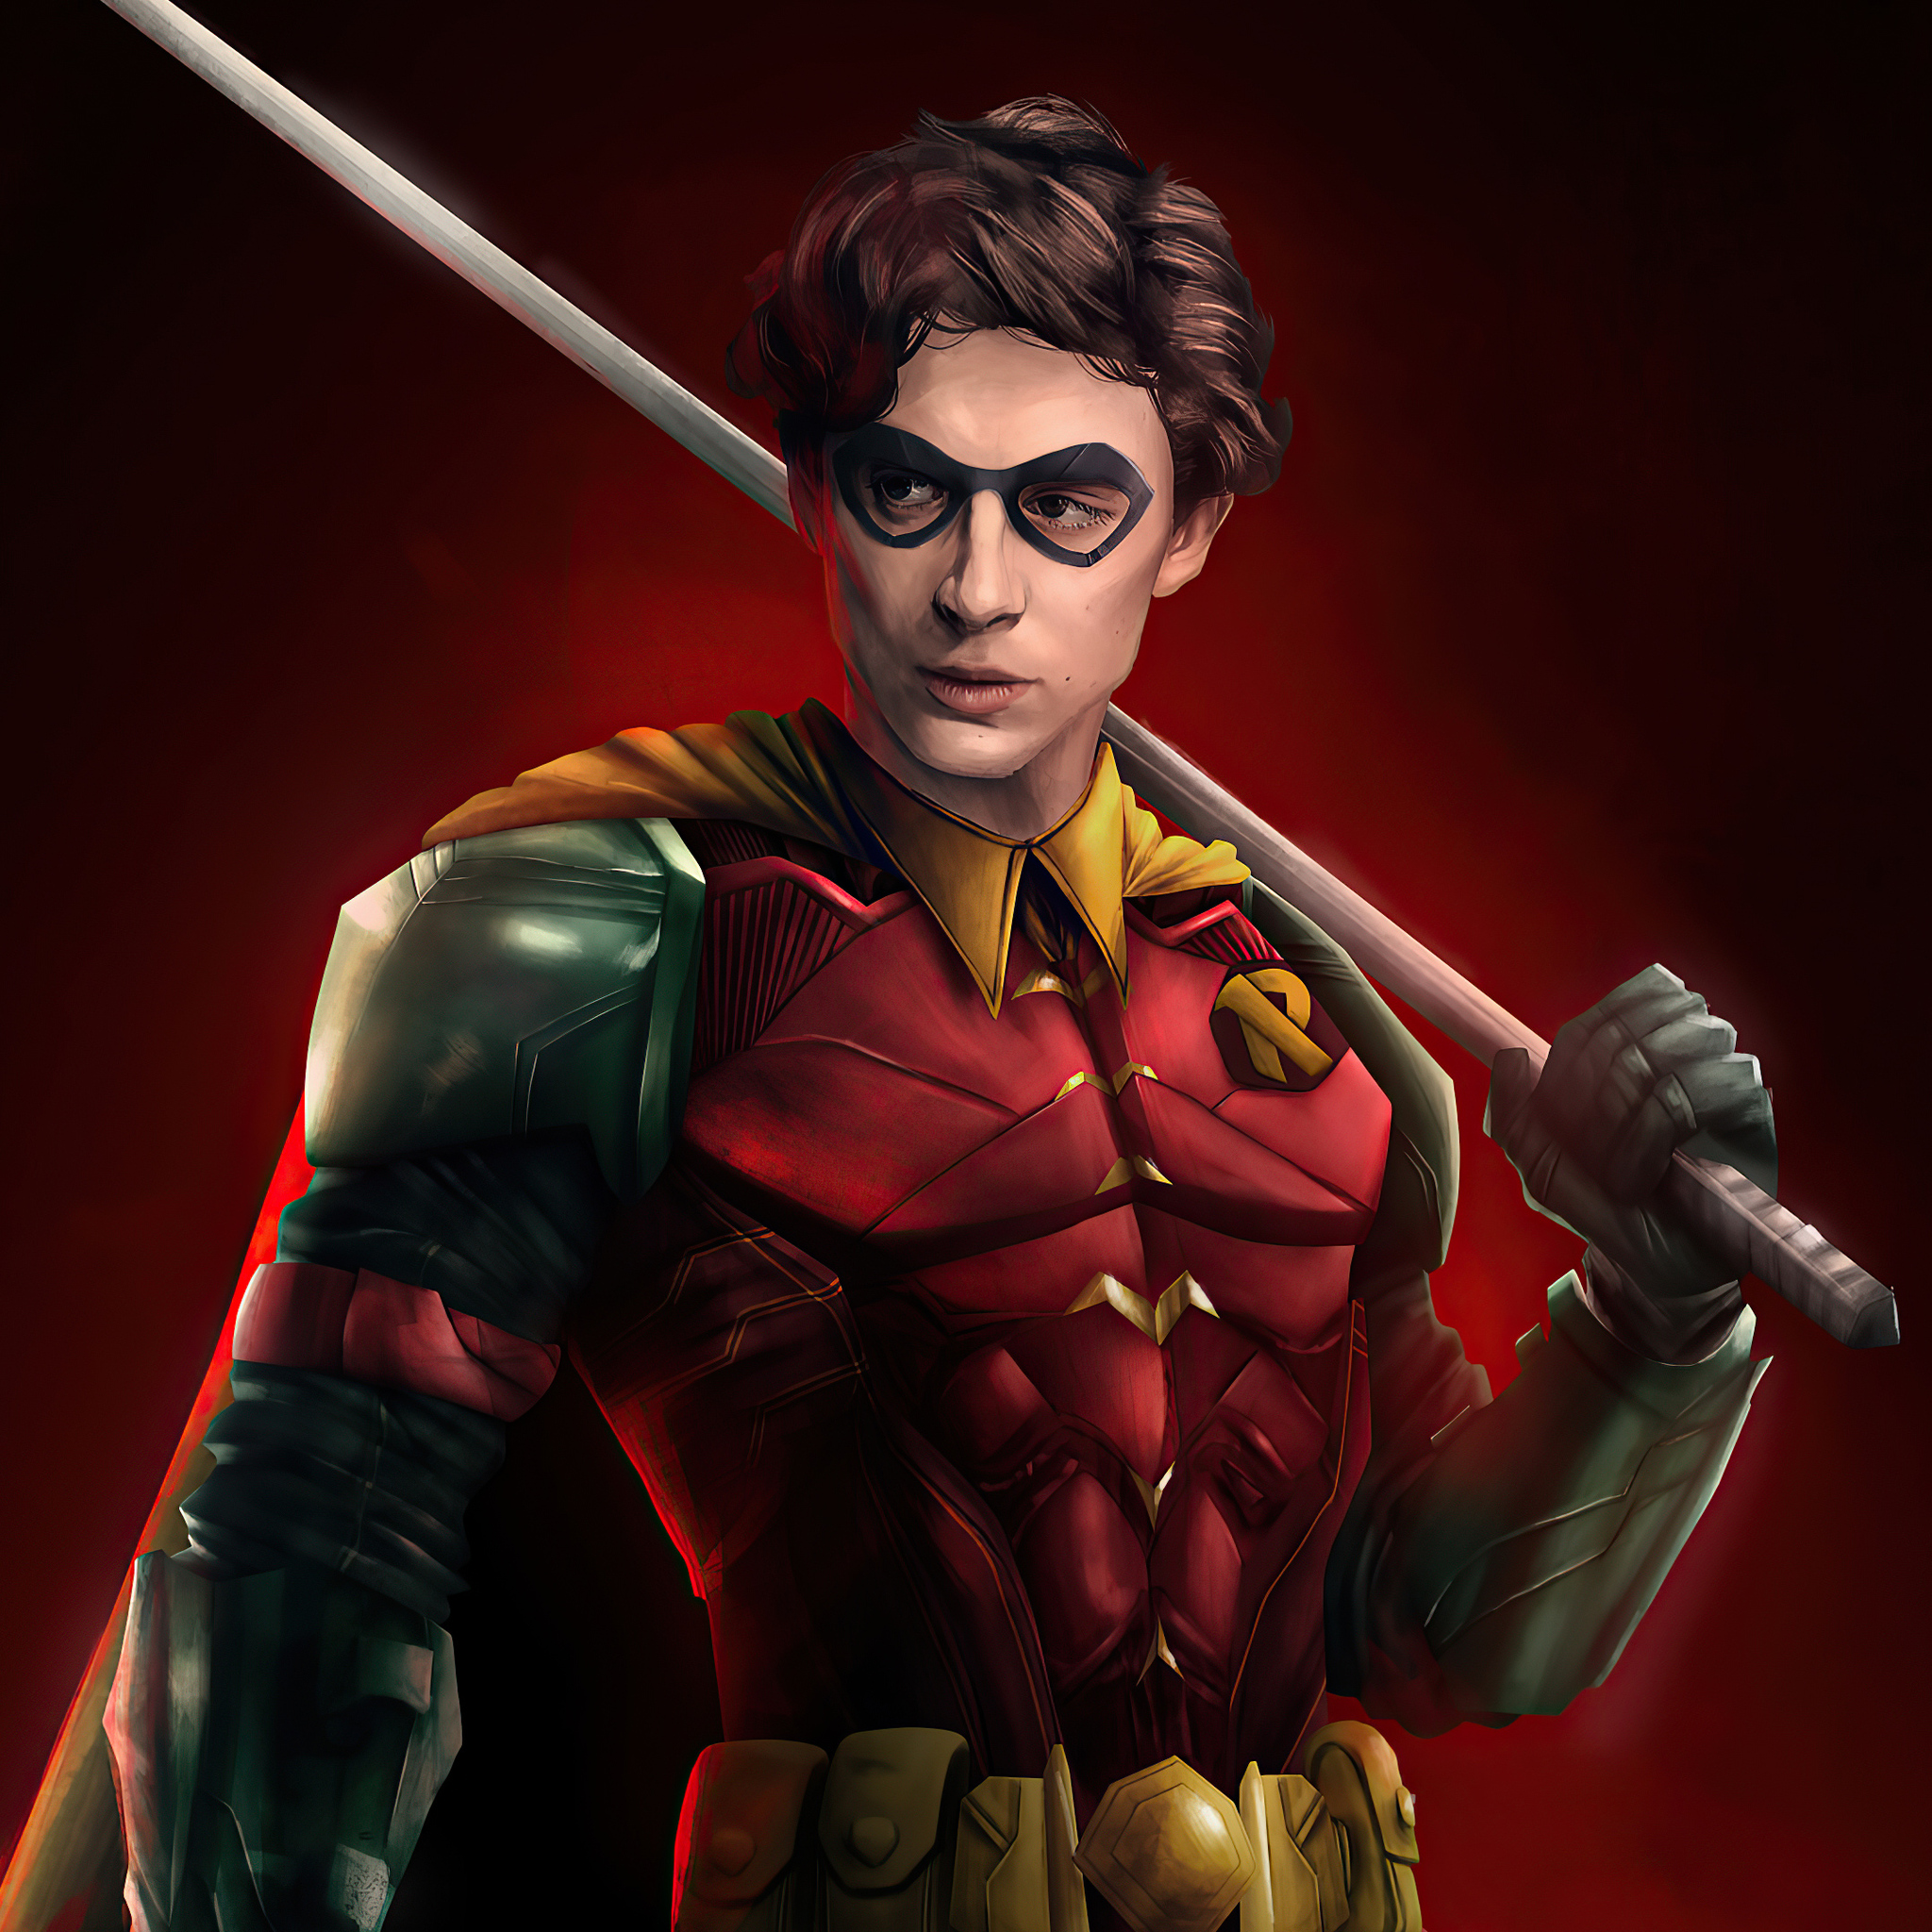 Timothee Chalamet As Robin 4k iPad Air HD 4k Wallpaper, Image, Background, Photo and Picture